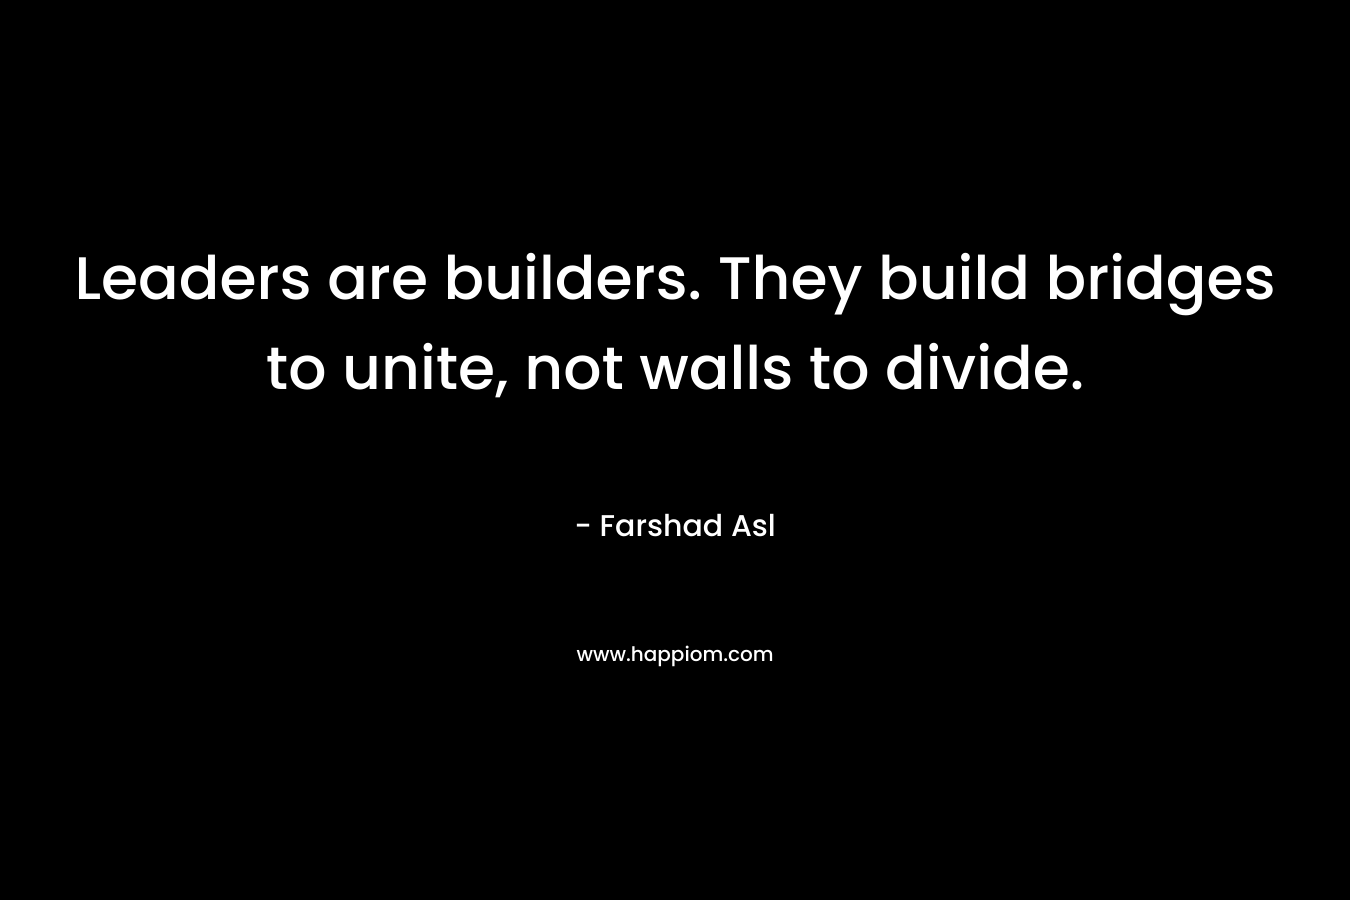 Leaders are builders. They build bridges to unite, not walls to divide. – Farshad Asl